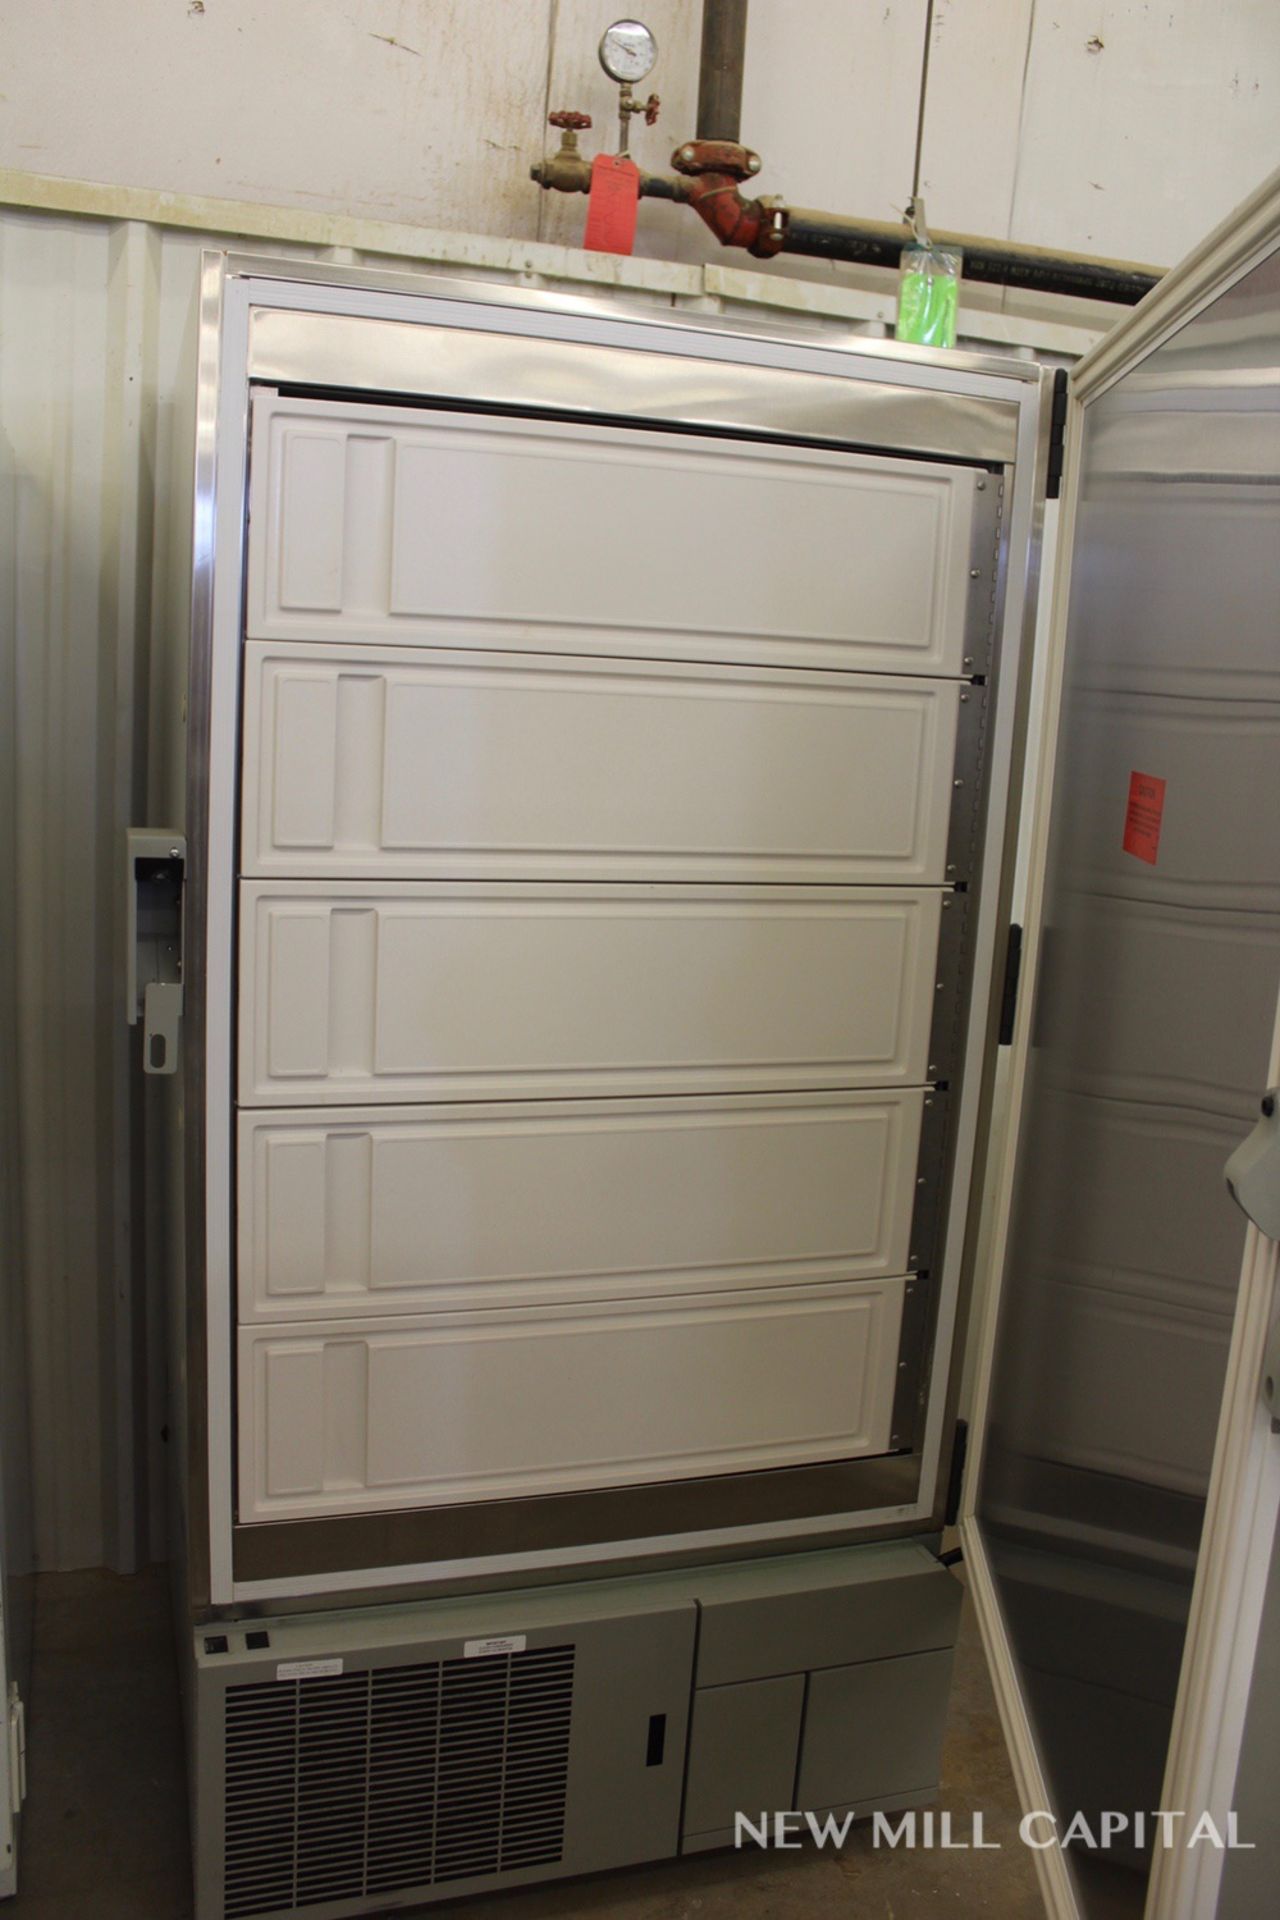 Revco, Ultra-Low Upright Freezer, M# ULT2586-9SI-D38 - Image 3 of 3